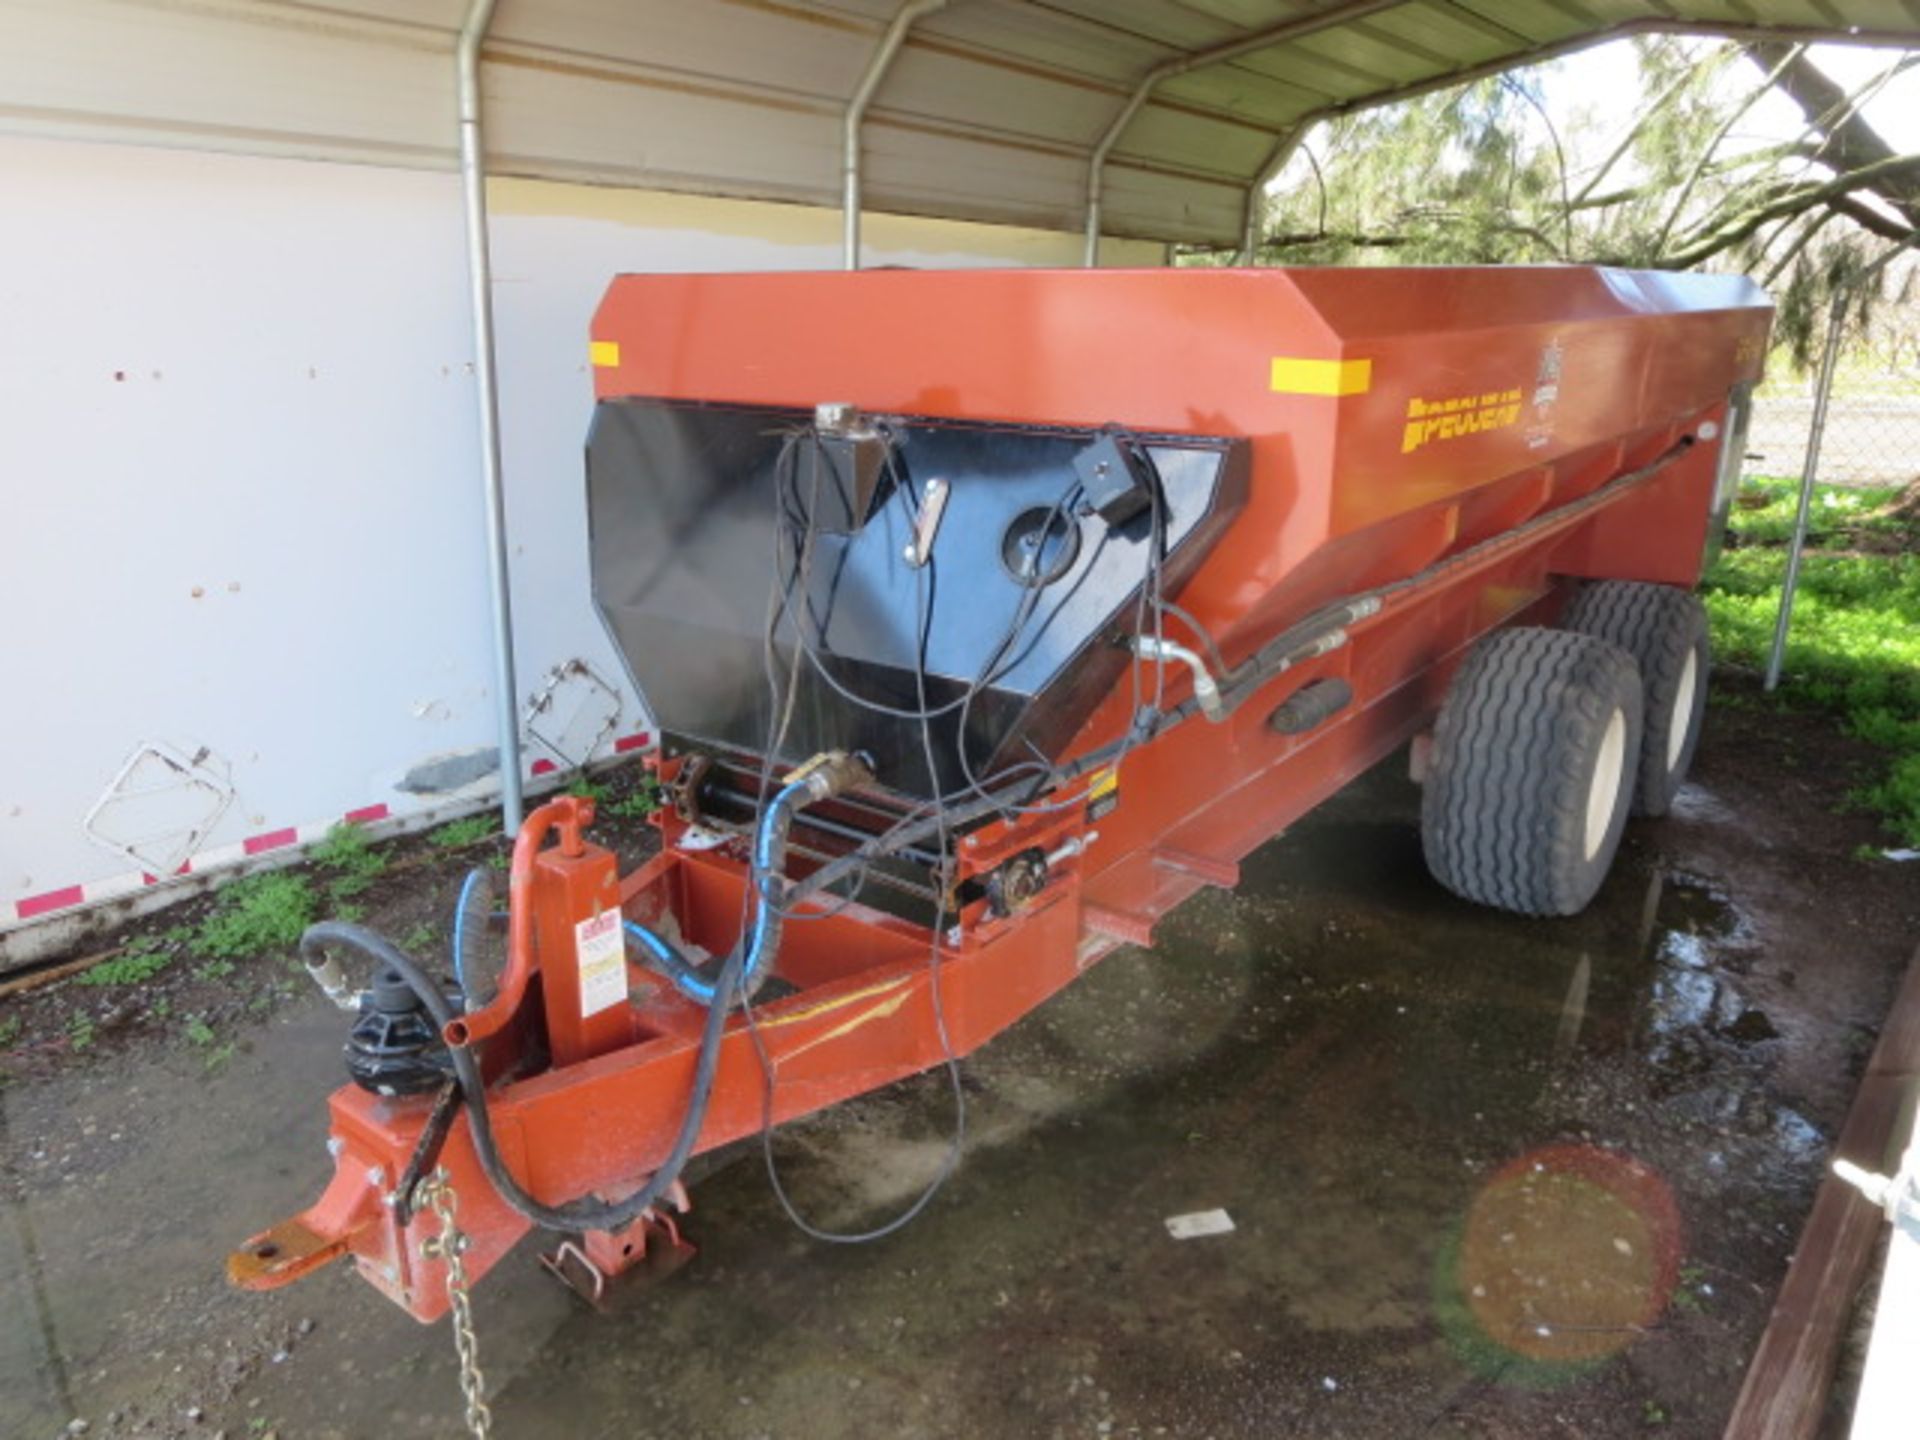 2016 Pequea Orchard Spreader Model LPV12G S/N 240; sale is subject to confirmation